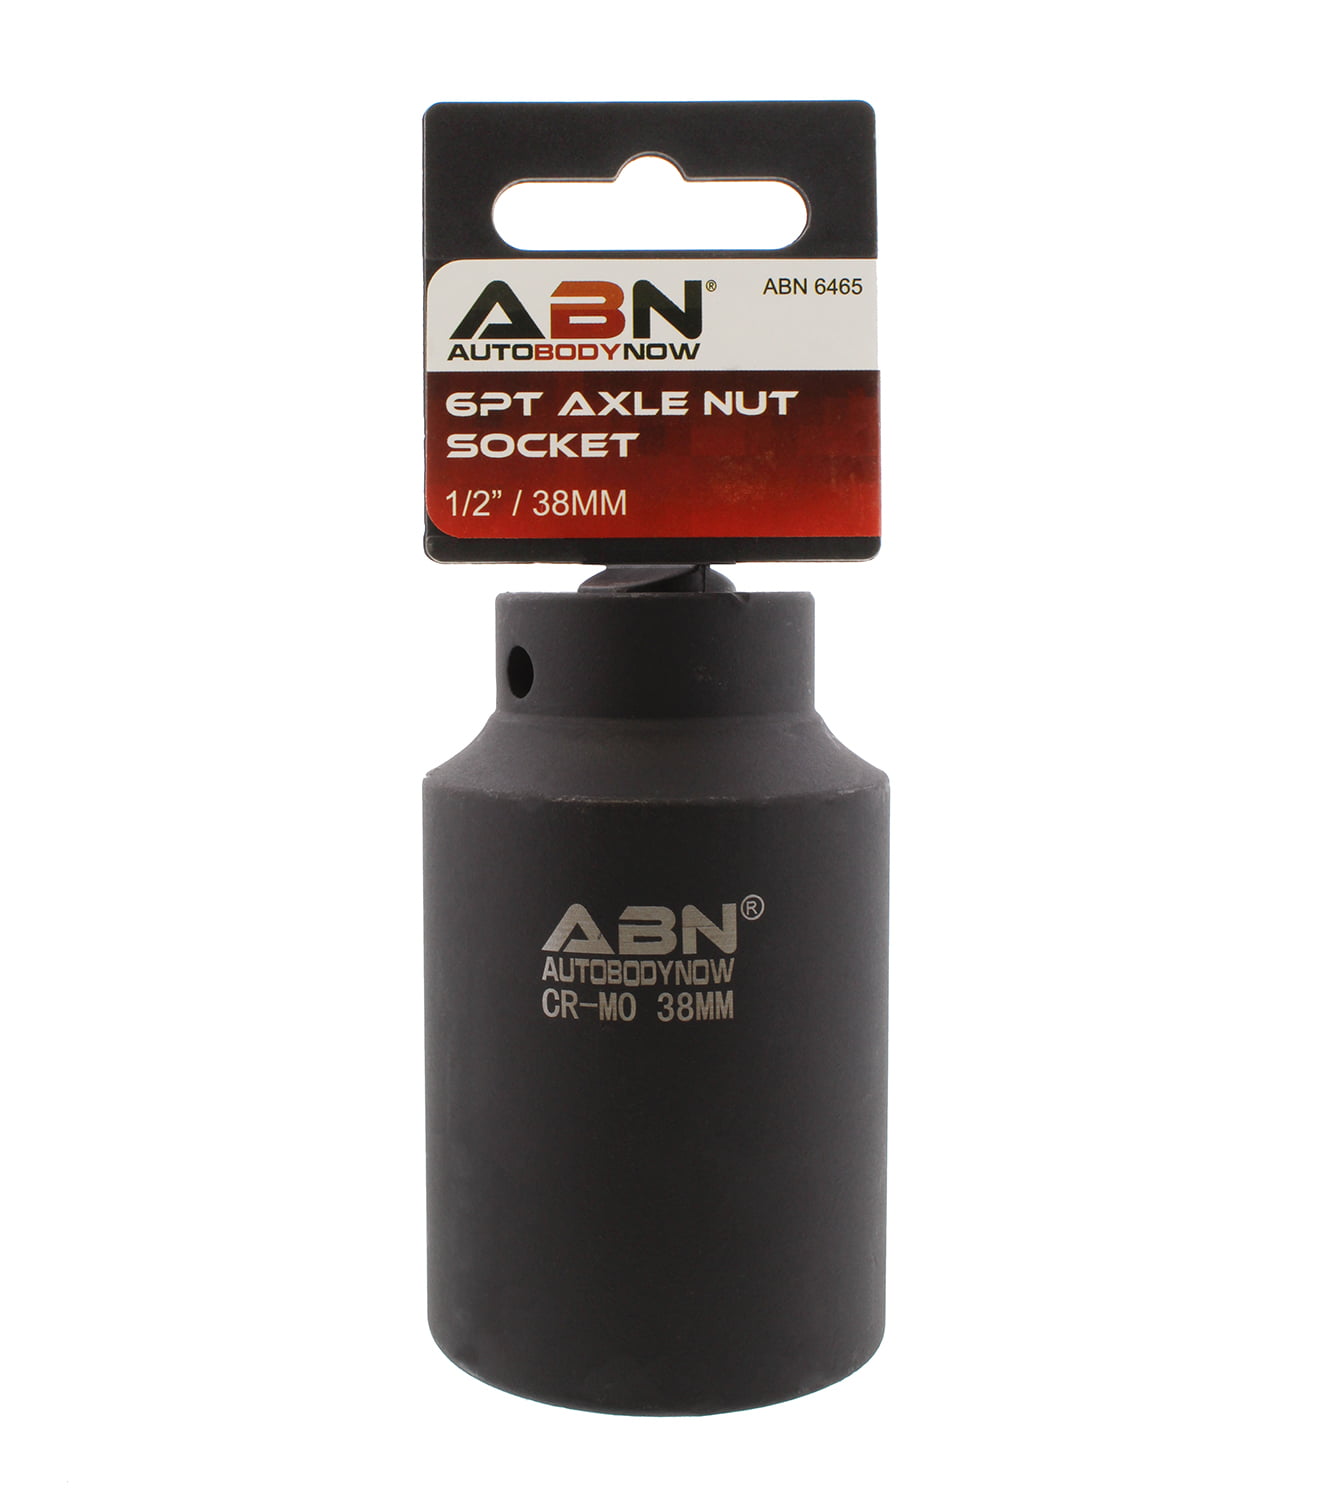 ABN Axle Nut Socket 30mm 1/2" Inch Drive Universal for 12pt Axle Nut on Vehicles